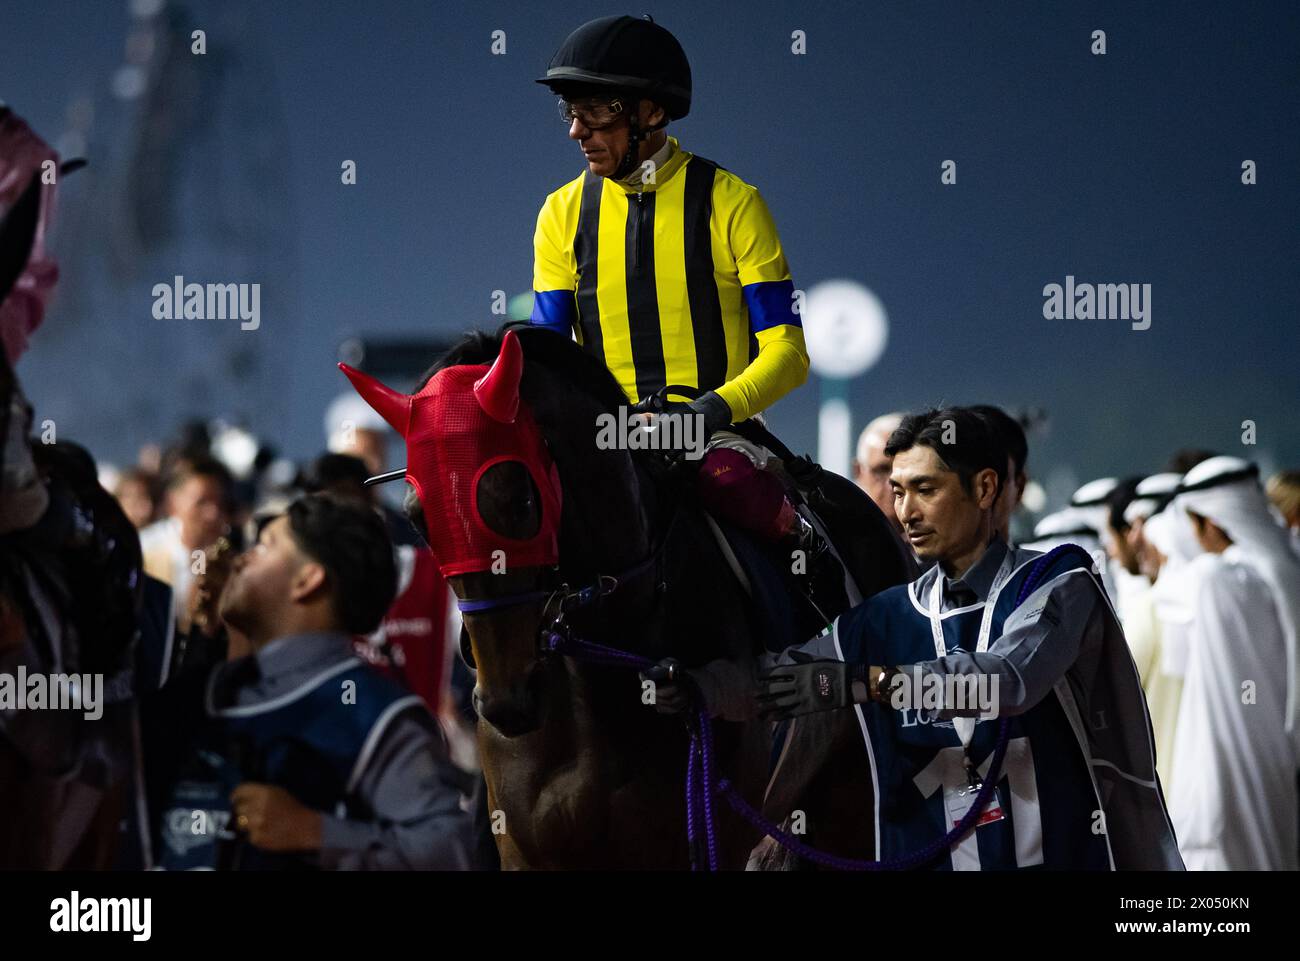 Stars On Earth and Frankie Dettori head to the start for the 2024 Group 1 Longines Dubai Sheema Classic, 30/03/24. Credit JTW Equine Images / Alamy. Stock Photo